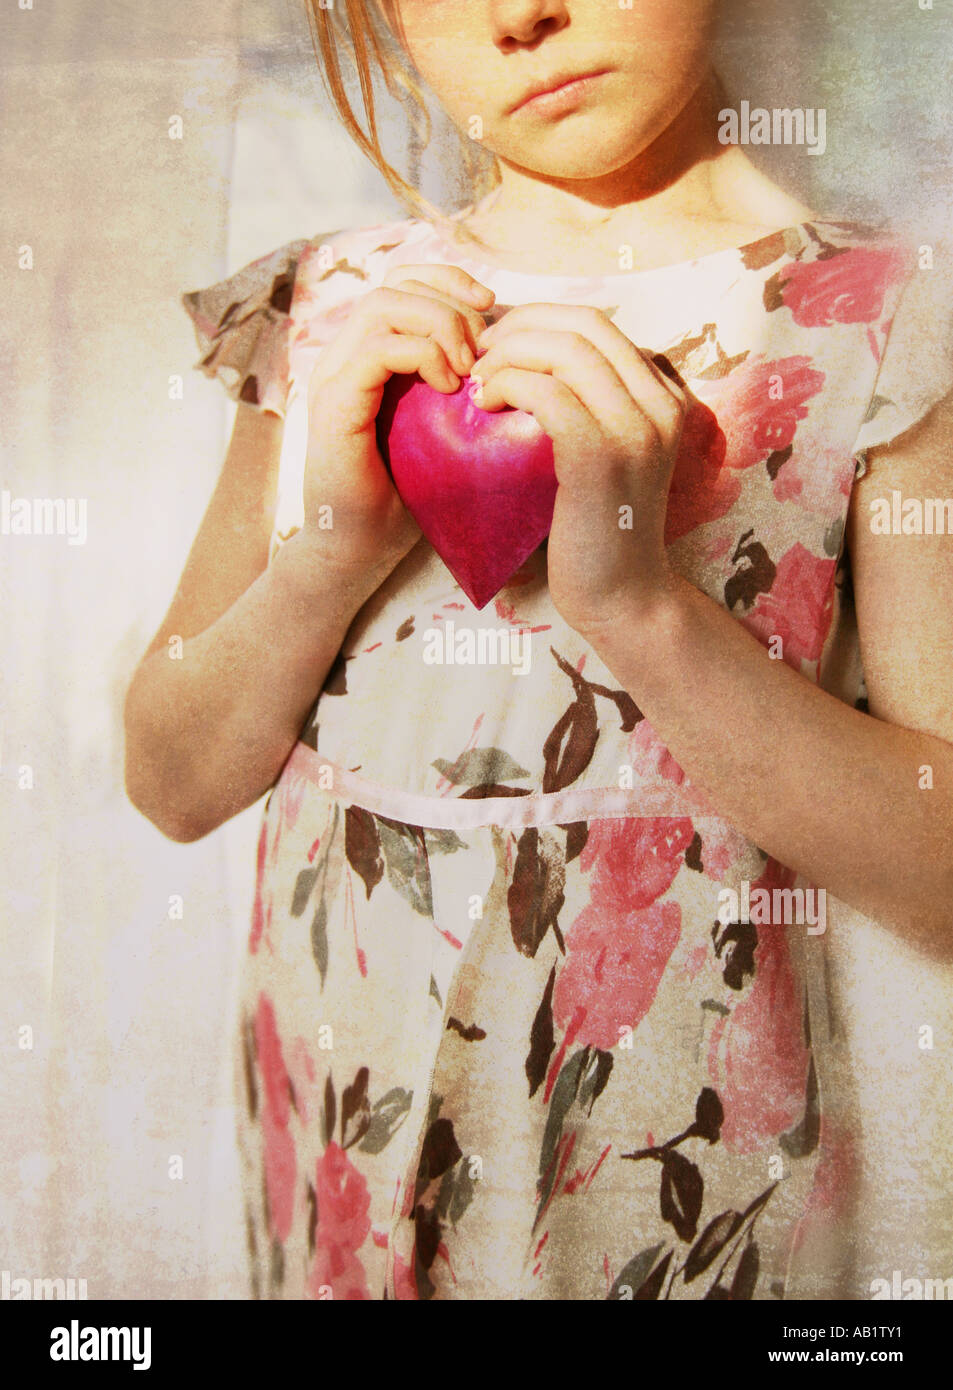 A girl holding a pink heart Banque D'Images